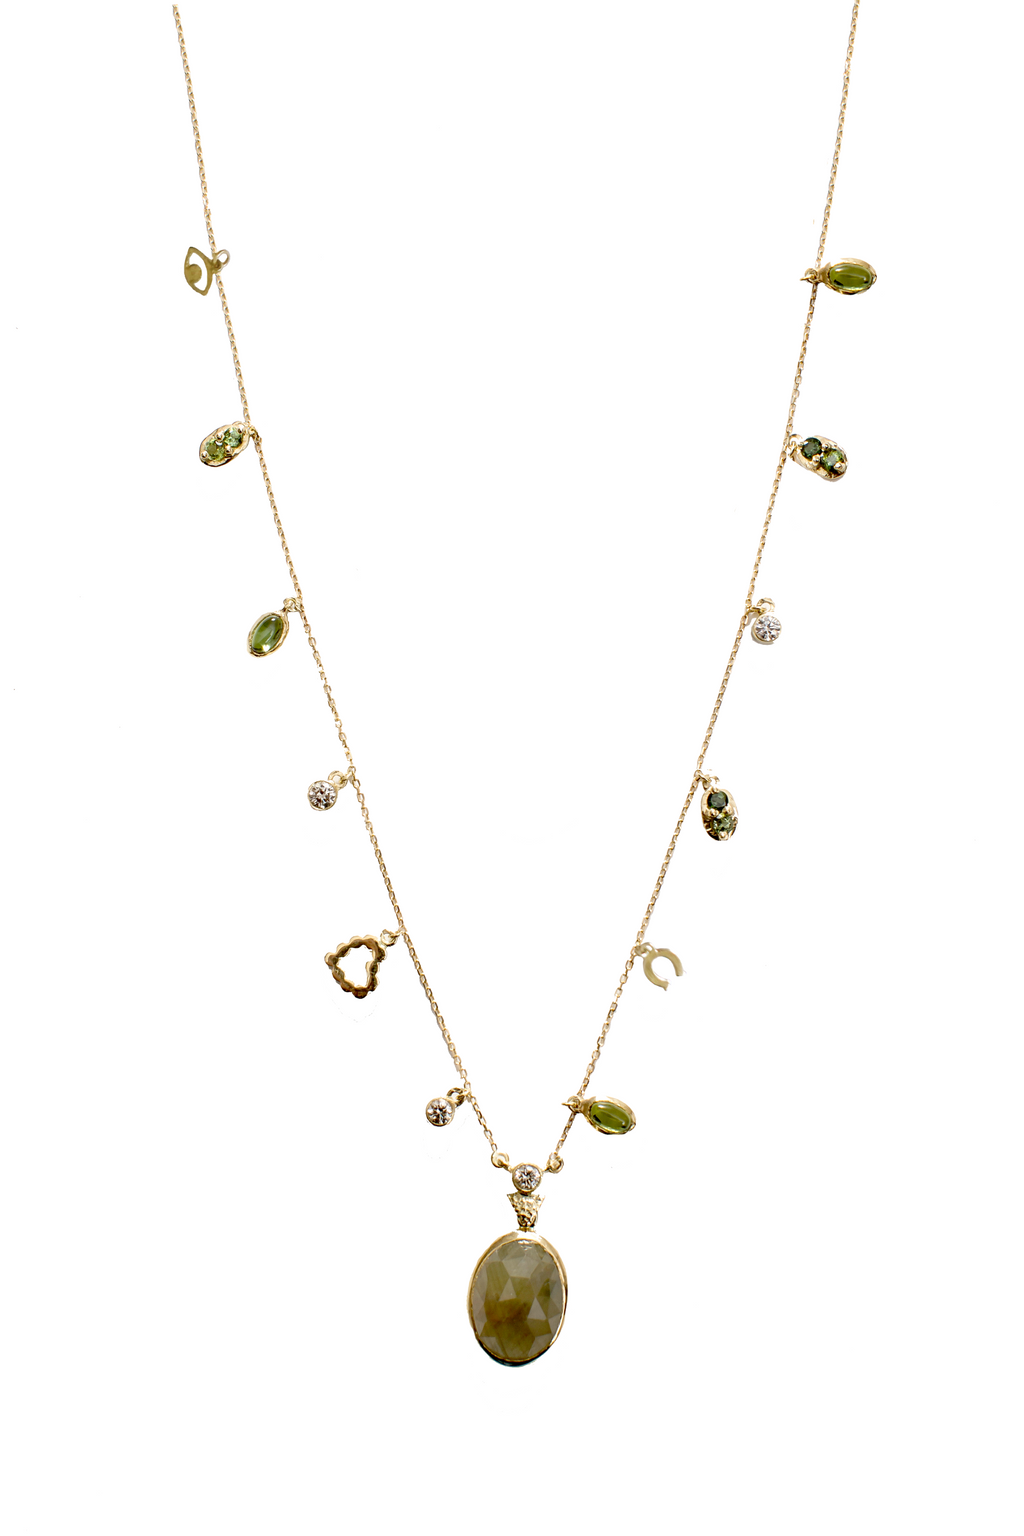 Long Sapphire Necklace with Diamonds and Green tourmaline Charms Drops